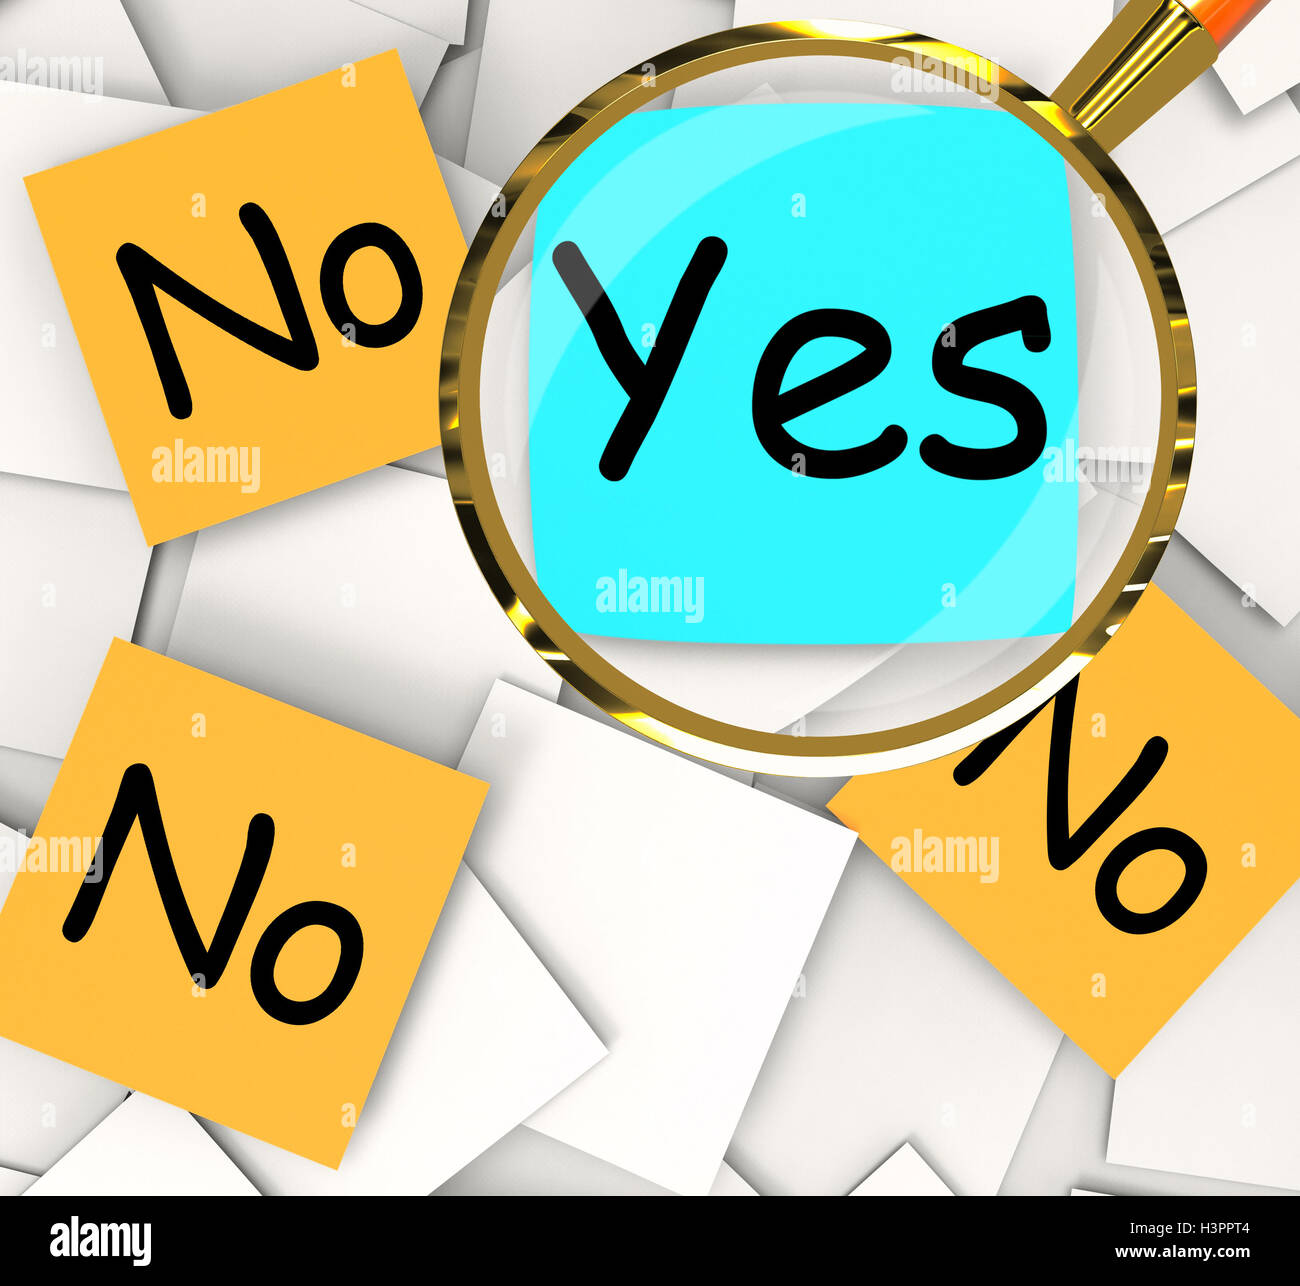 Yes No Post-It Papers Mean Positive Or Negative Response Stock Photo